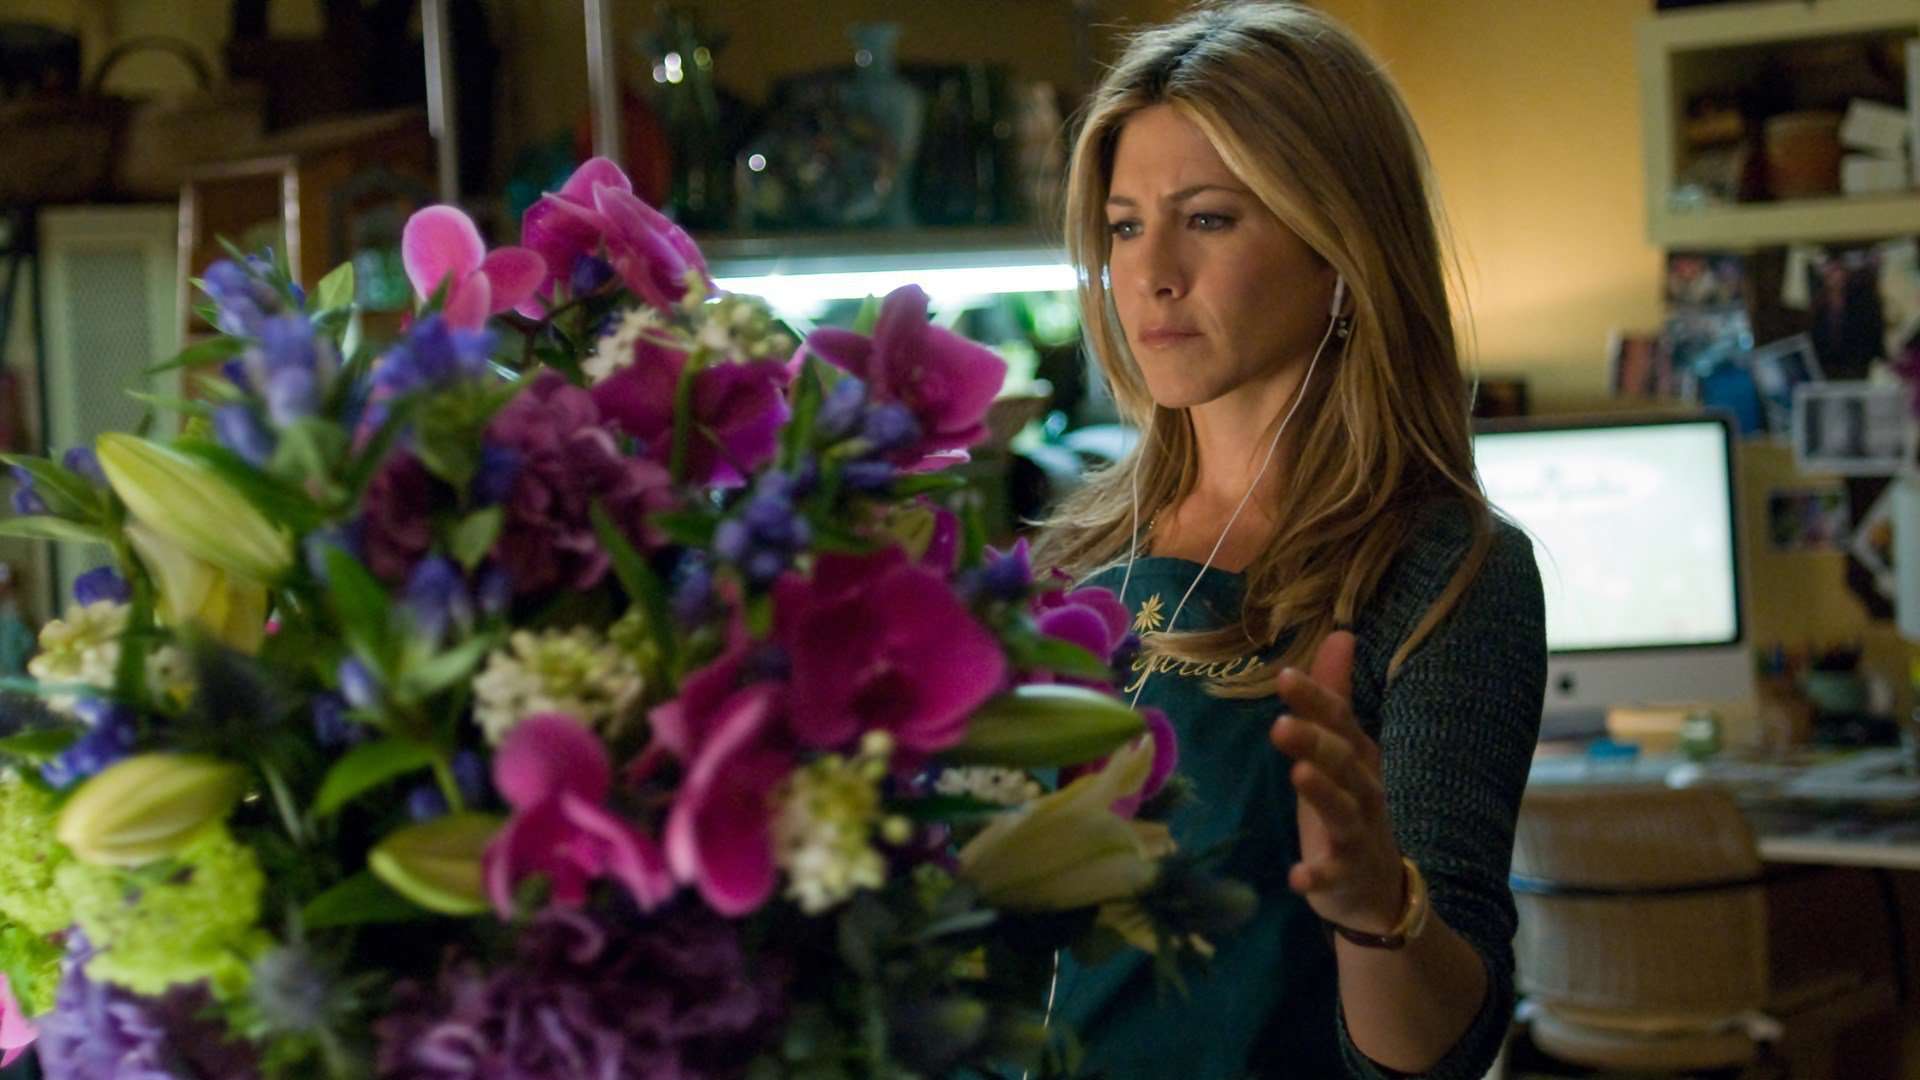 Top 5 films about florists for inspiration and motivation